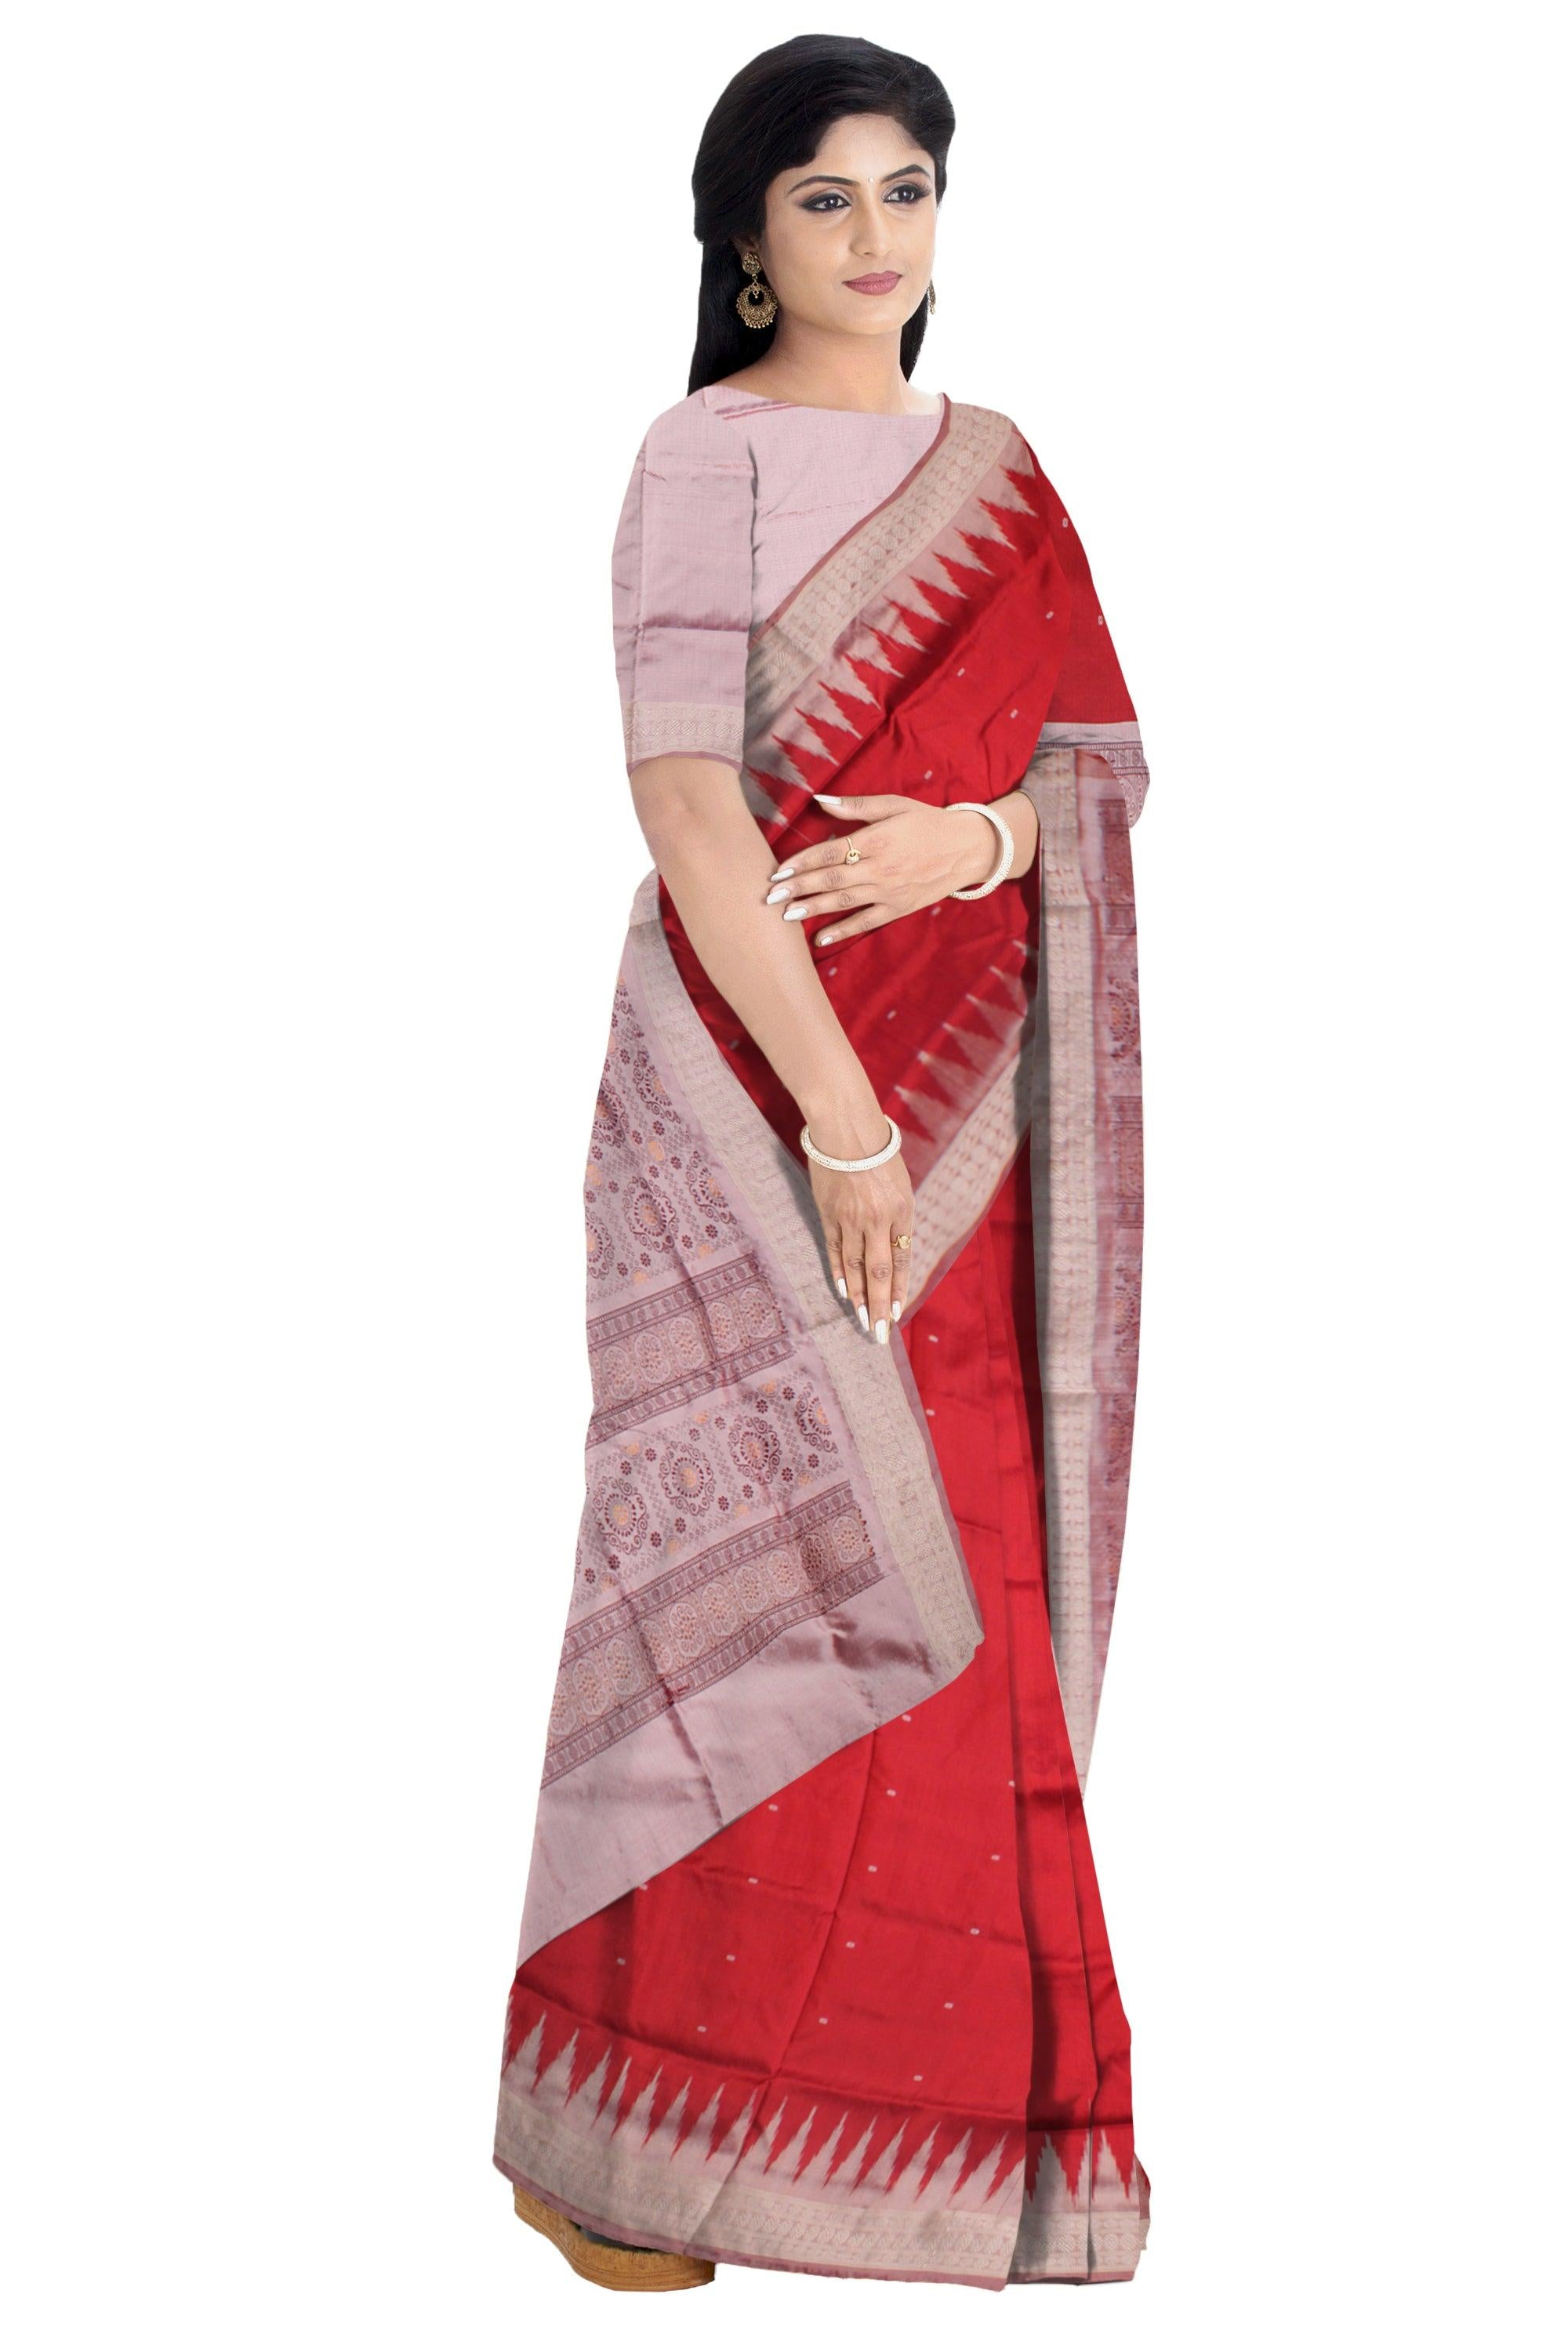 MARRAIGE COLLECTION SMALL BOTTY PATTERN PATA SAREE IS RED AND GRAY COLOR BASE, AVAILABLE WITH MATCHING BLOUSE PIECE. - Koshali Arts & Crafts Enterprise